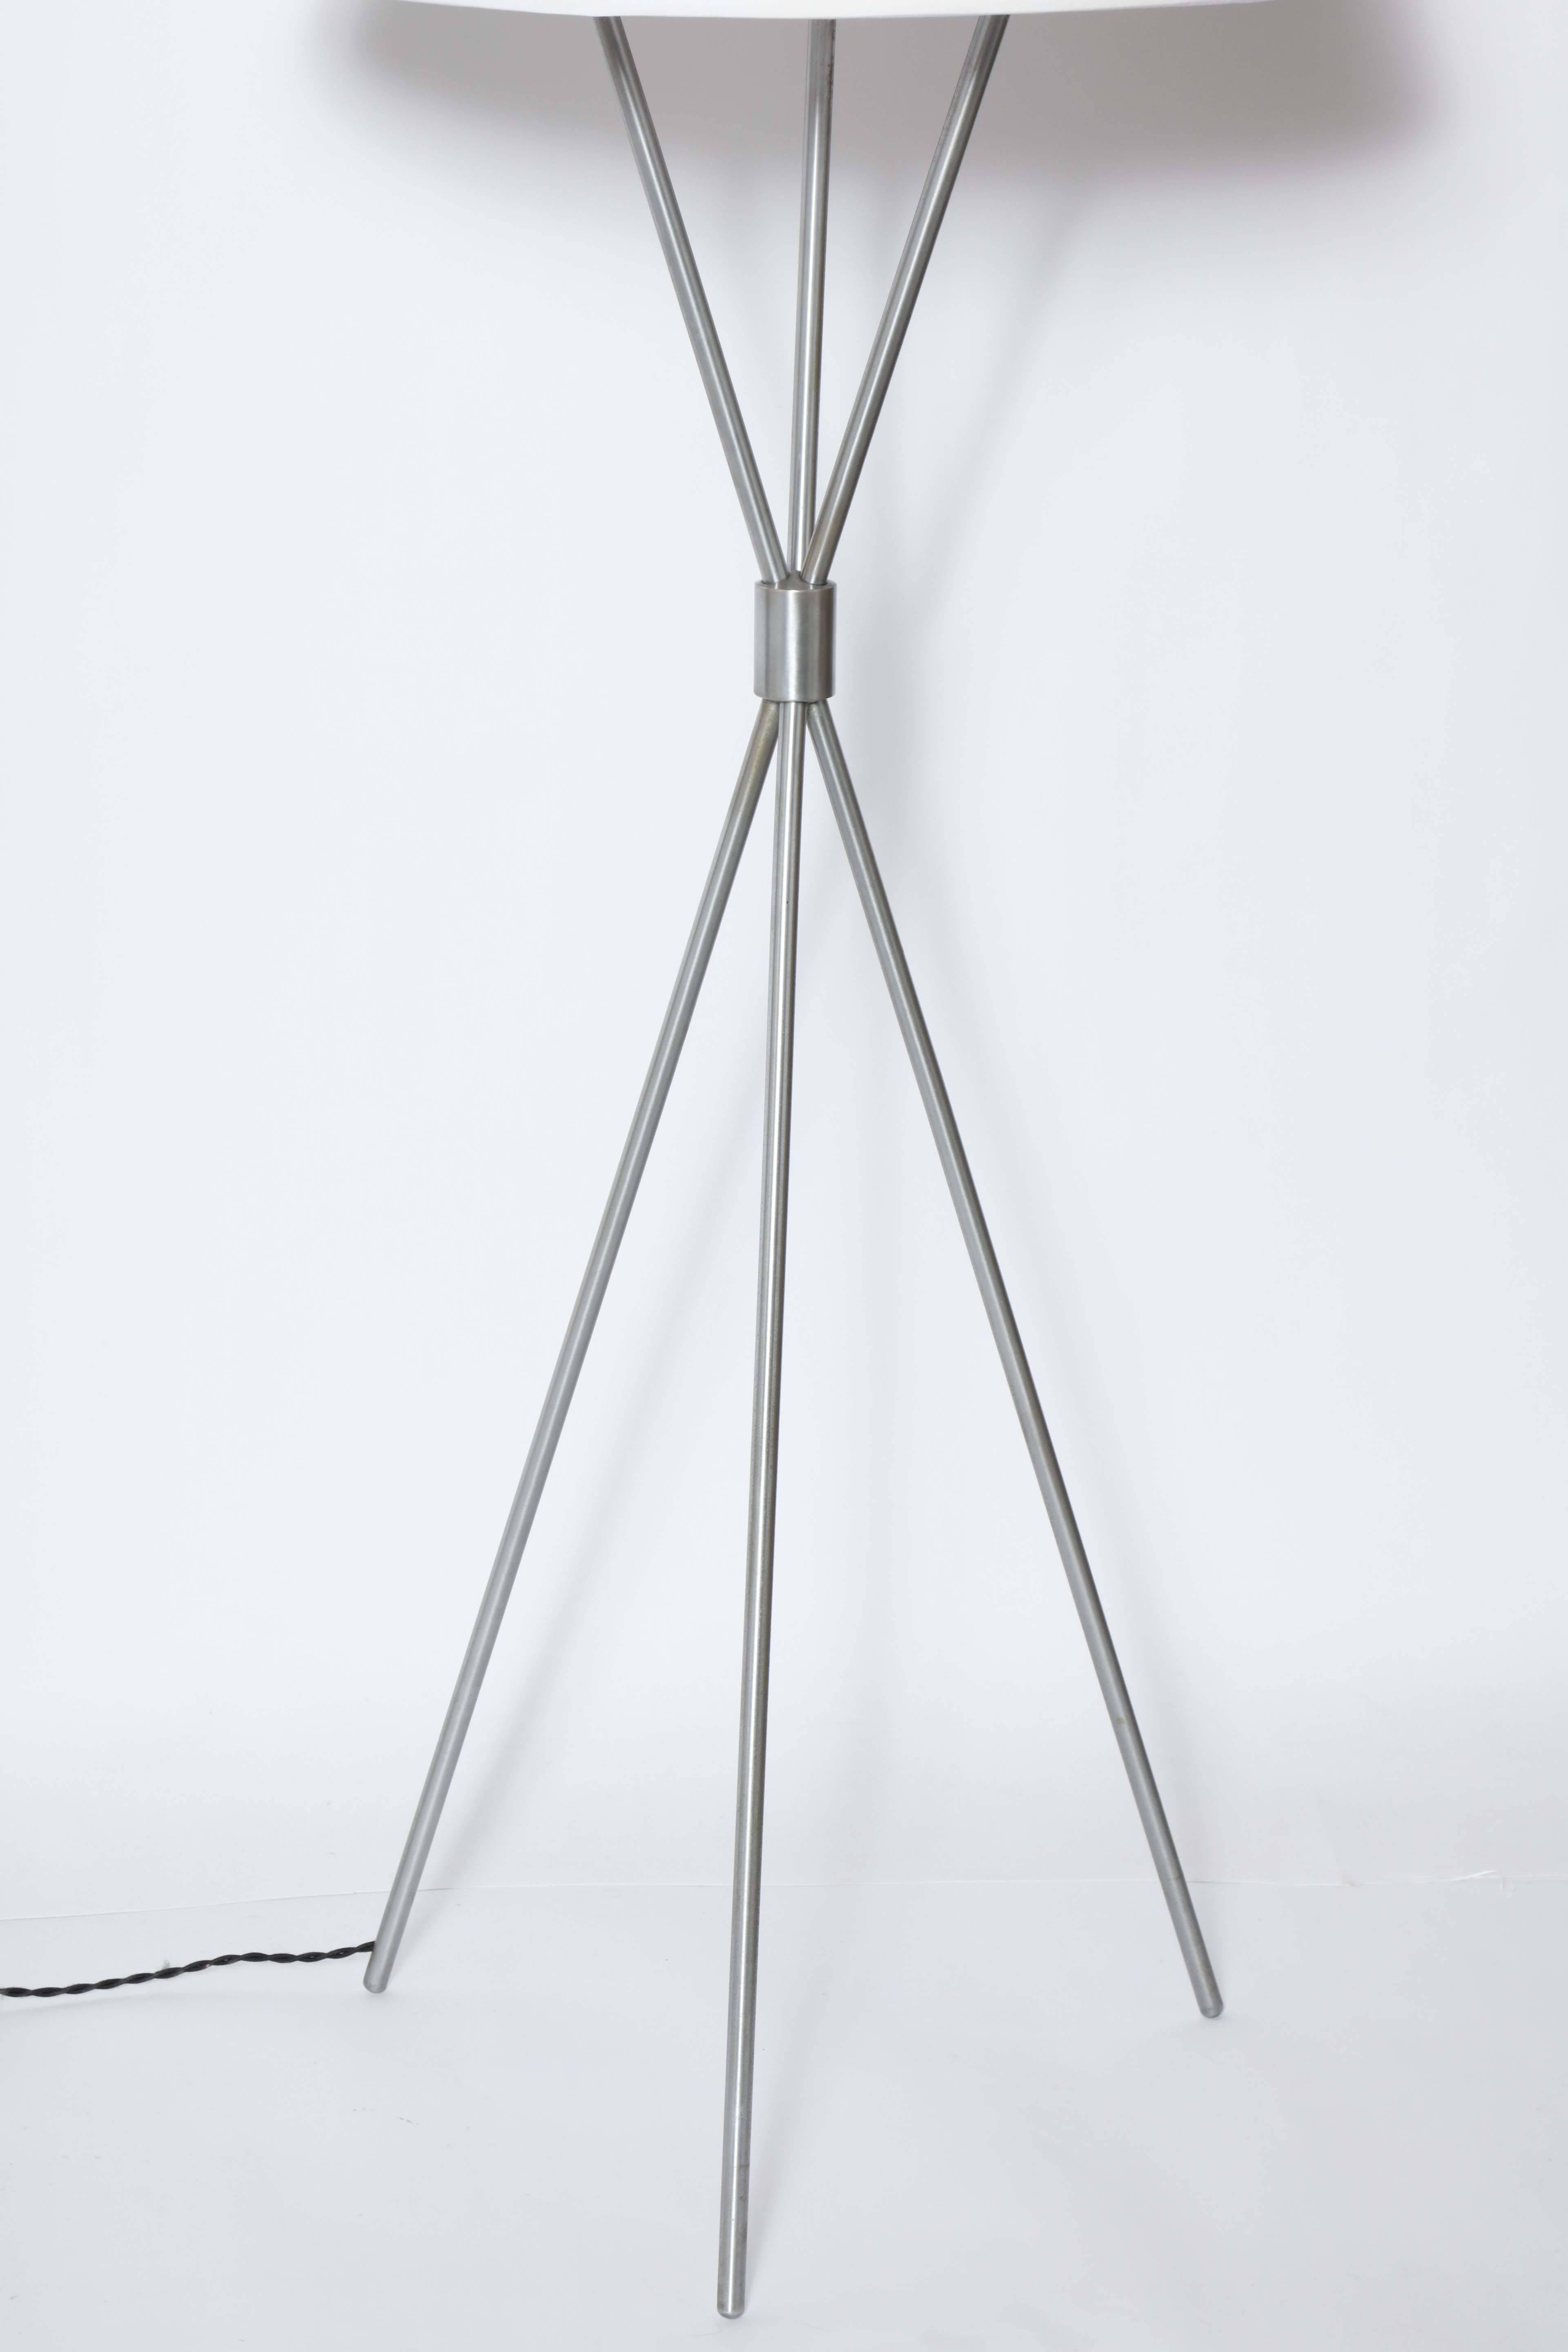 Model 201 Robsjohn-Gibbings for Hansen Lighting Co. Brushed Nickel Tripod Floor Lamp, Early 1950's.  Featuring Brushed Nickel and Nickel Plate tripod legs, cylindrical clasp and newly recovered White Parchment Shade, to original 9H x 20D framework.